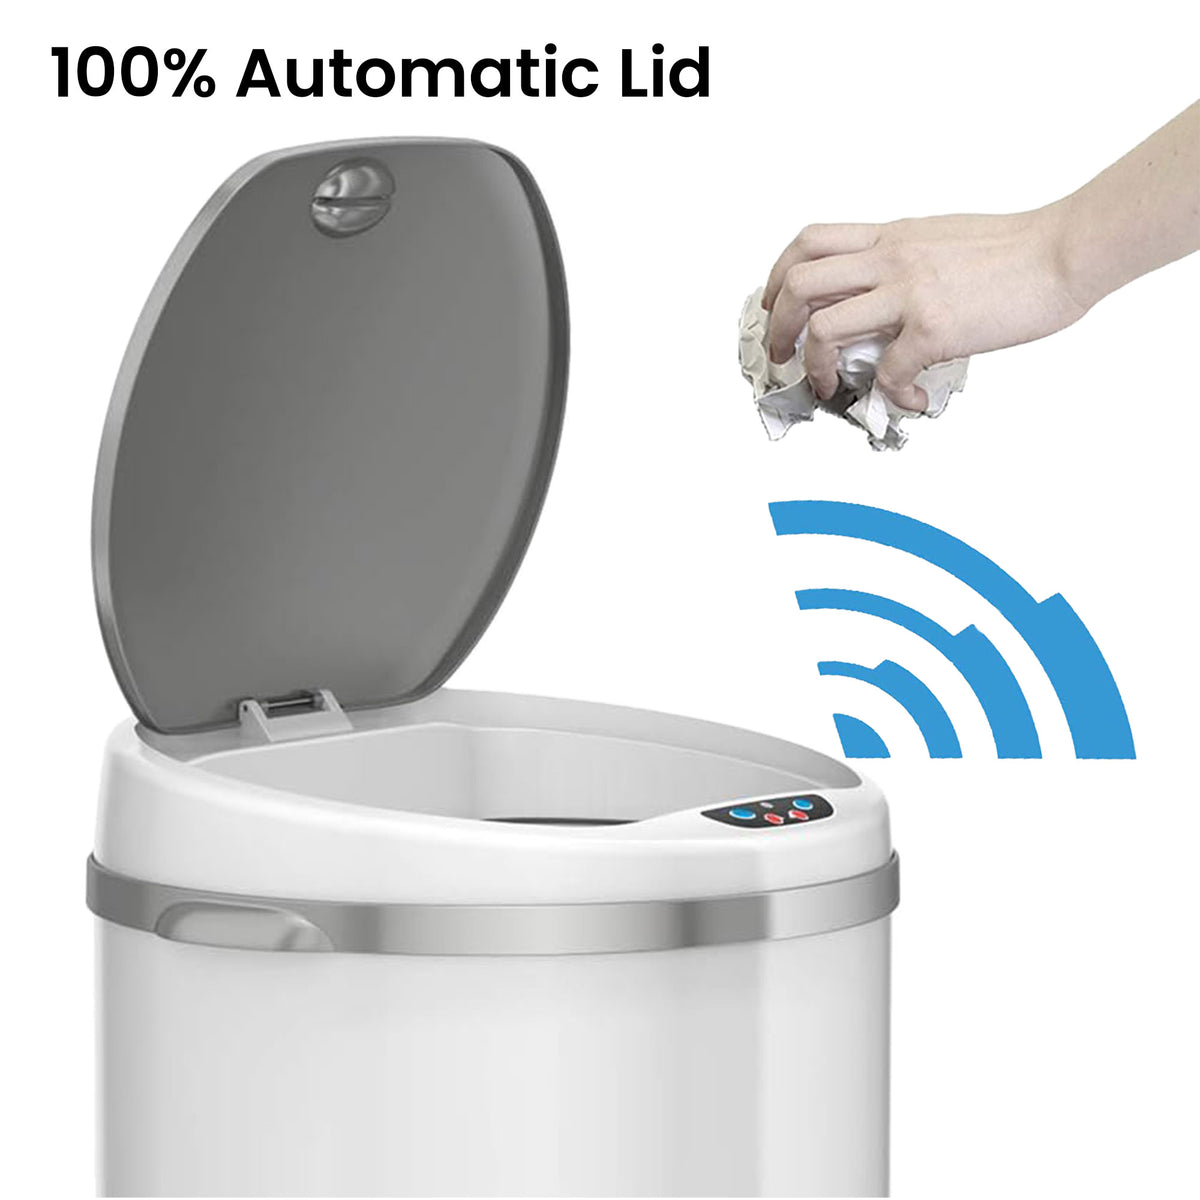 iTouchless 8 Gallon White Stainless Steel Sensor Trash Can with Odor Filter 100% Automatic Lid